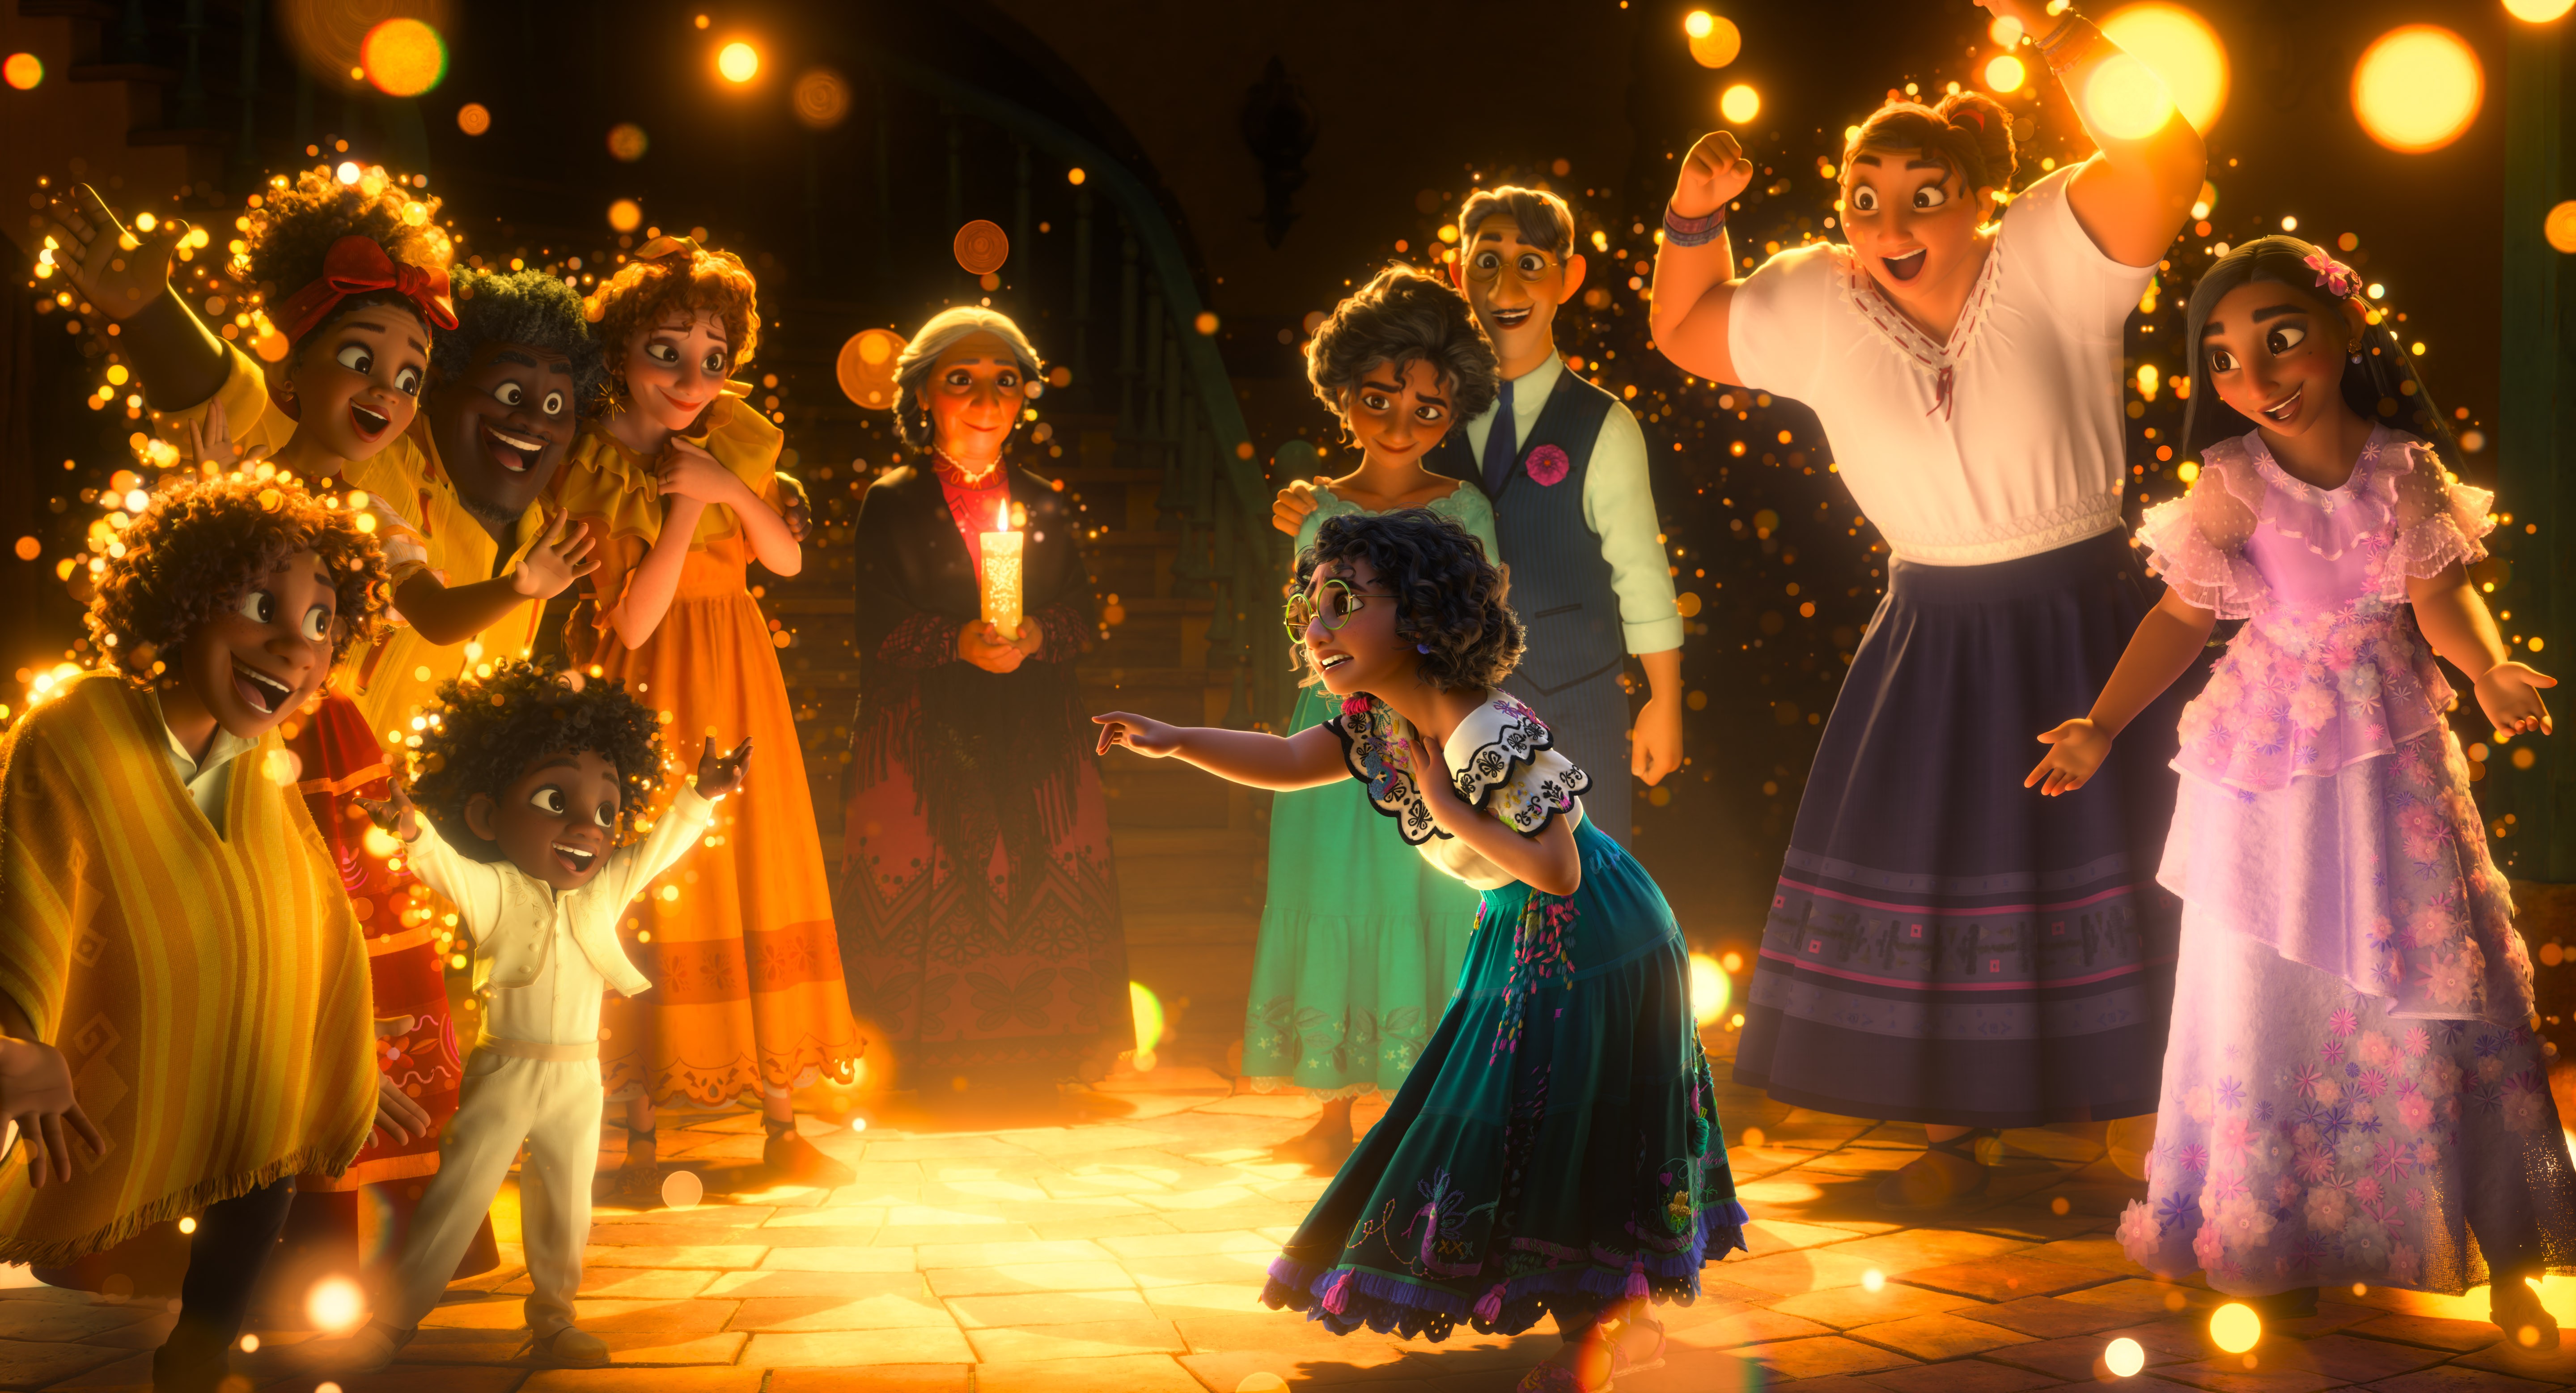 MEET THE MADRIGALS – Walt Disney Animation Studios’ “Encanto” introduces the Madrigals, a compelling and complicated extended family who live in a wondrous and charmed place in the mountains of Colombia. Opening in the U.S. on Nov. 24, 2021, “Encanto” fea (Foto: DISNEY)